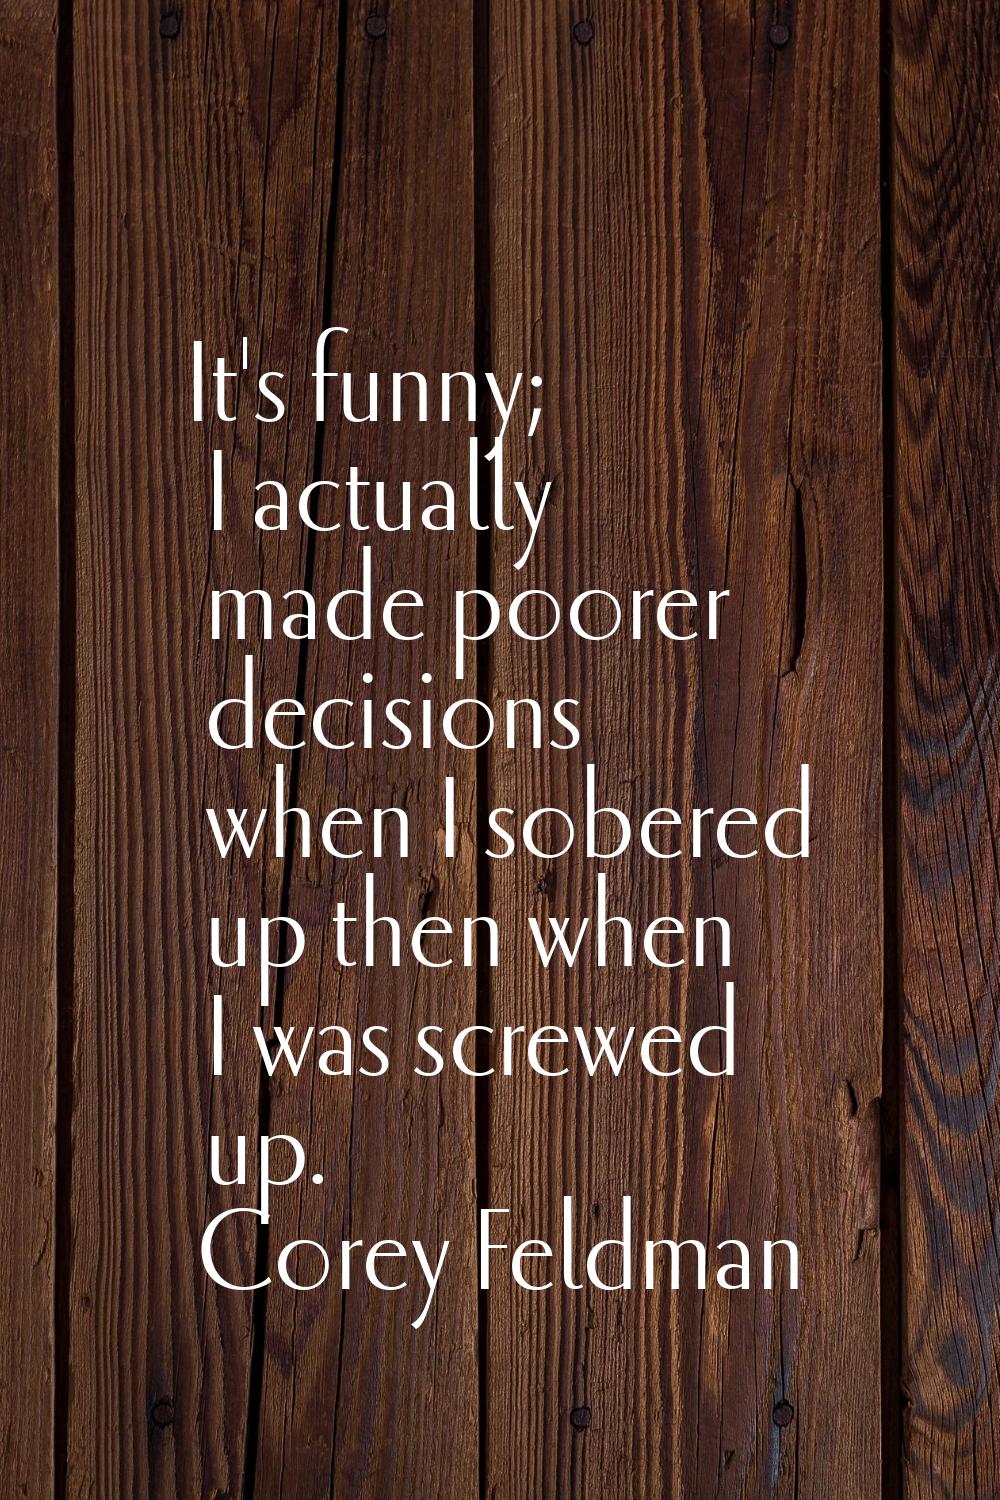 It's funny; I actually made poorer decisions when I sobered up then when I was screwed up.